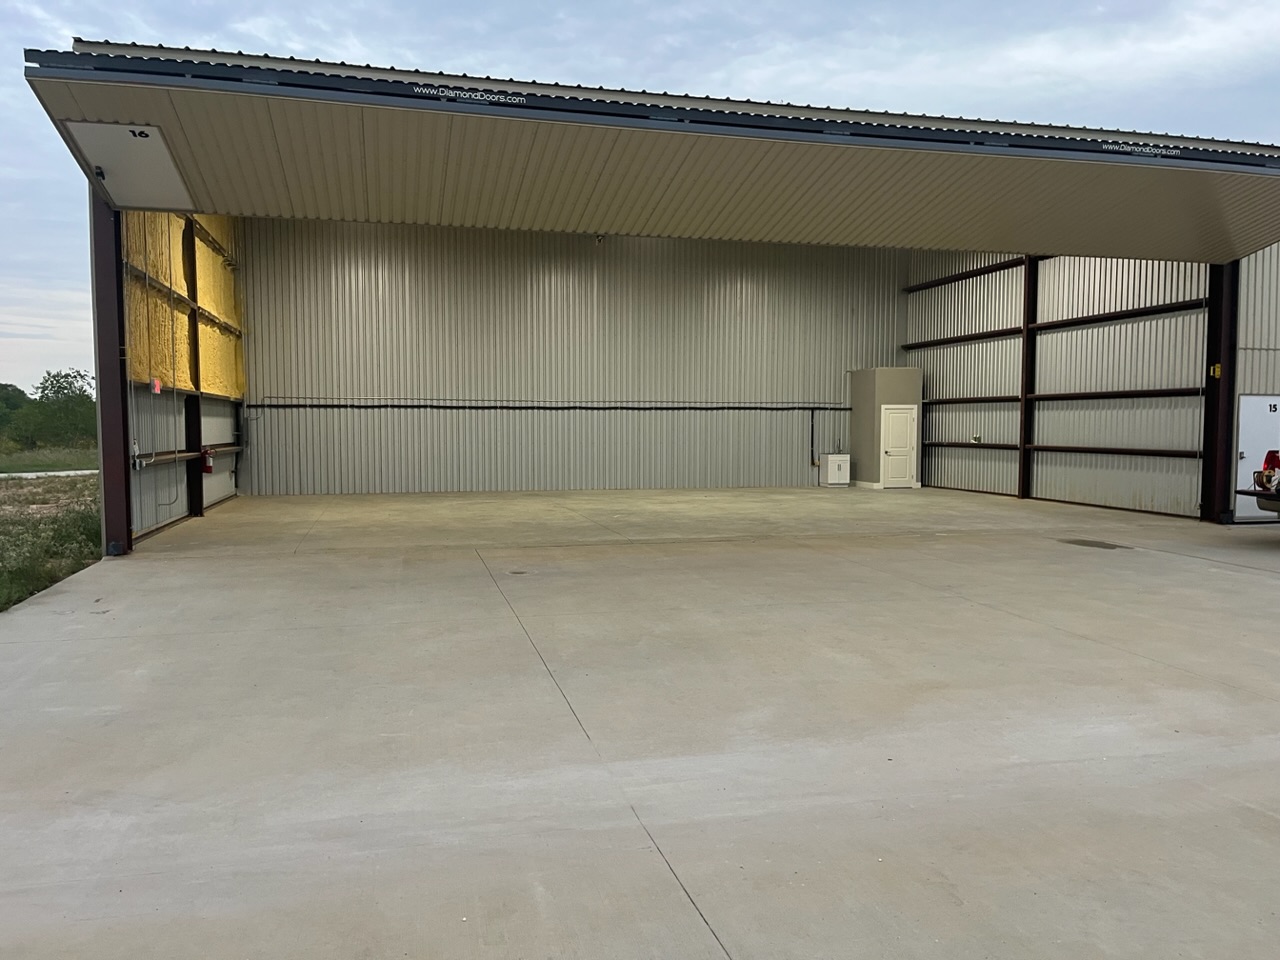 Hangars for SALE or RENT in DALLAS - FREE Ads - HangarTrader